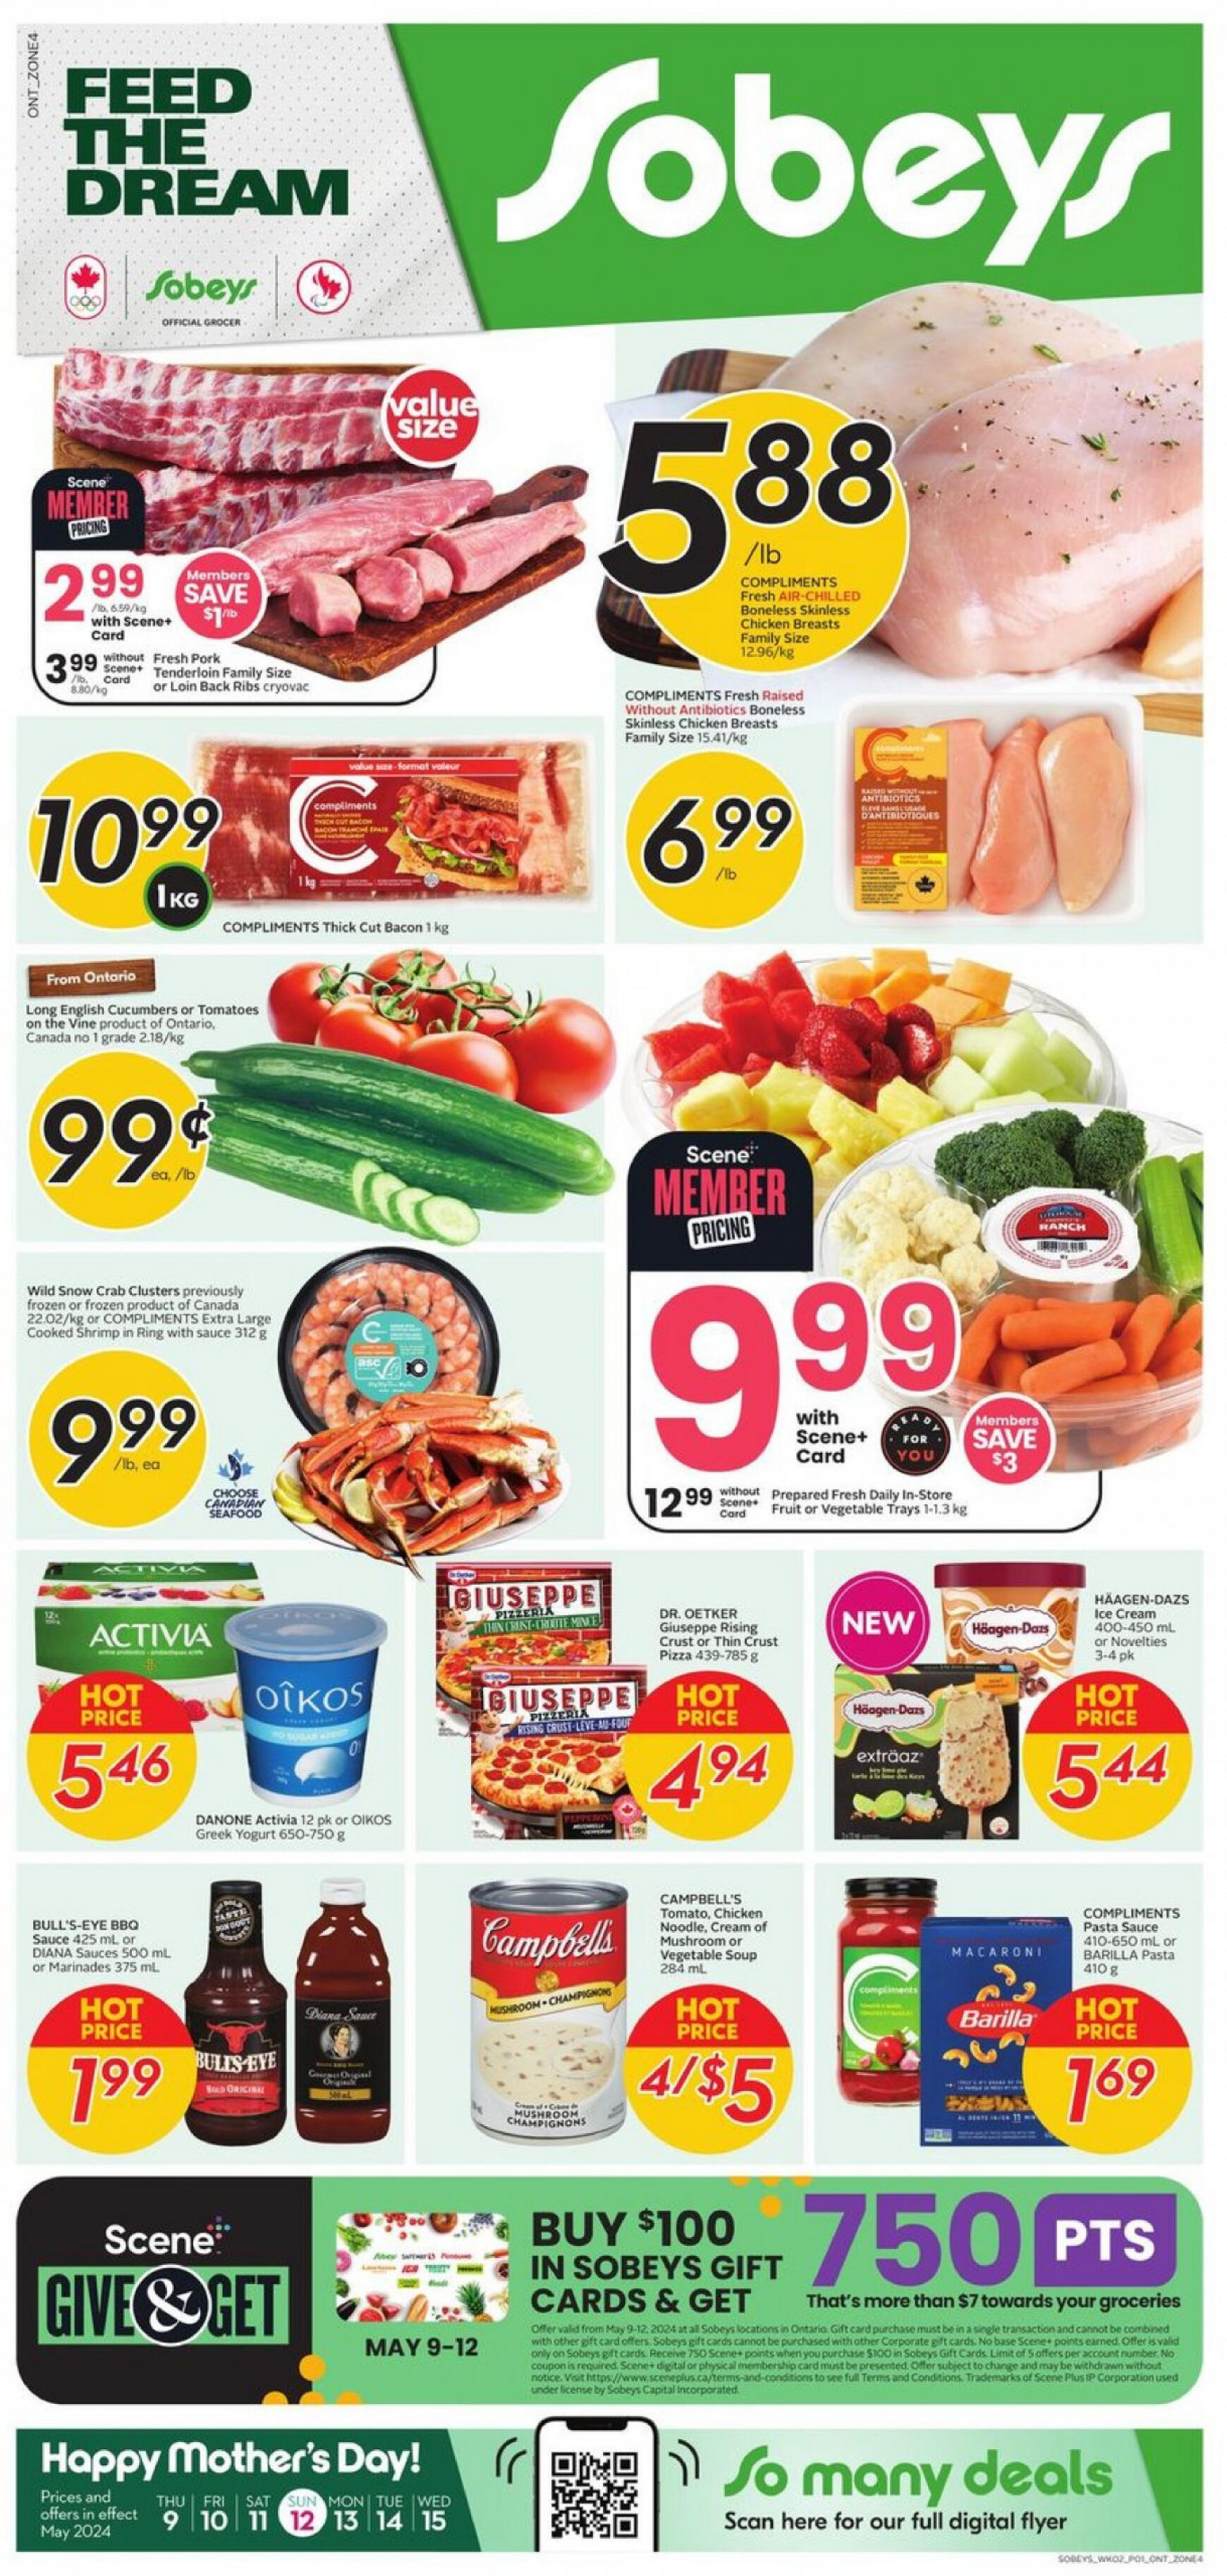 sobeys - Sobeys - Weekly Flyer - Ontario flyer current 09.05. - 15.05. - page: 1